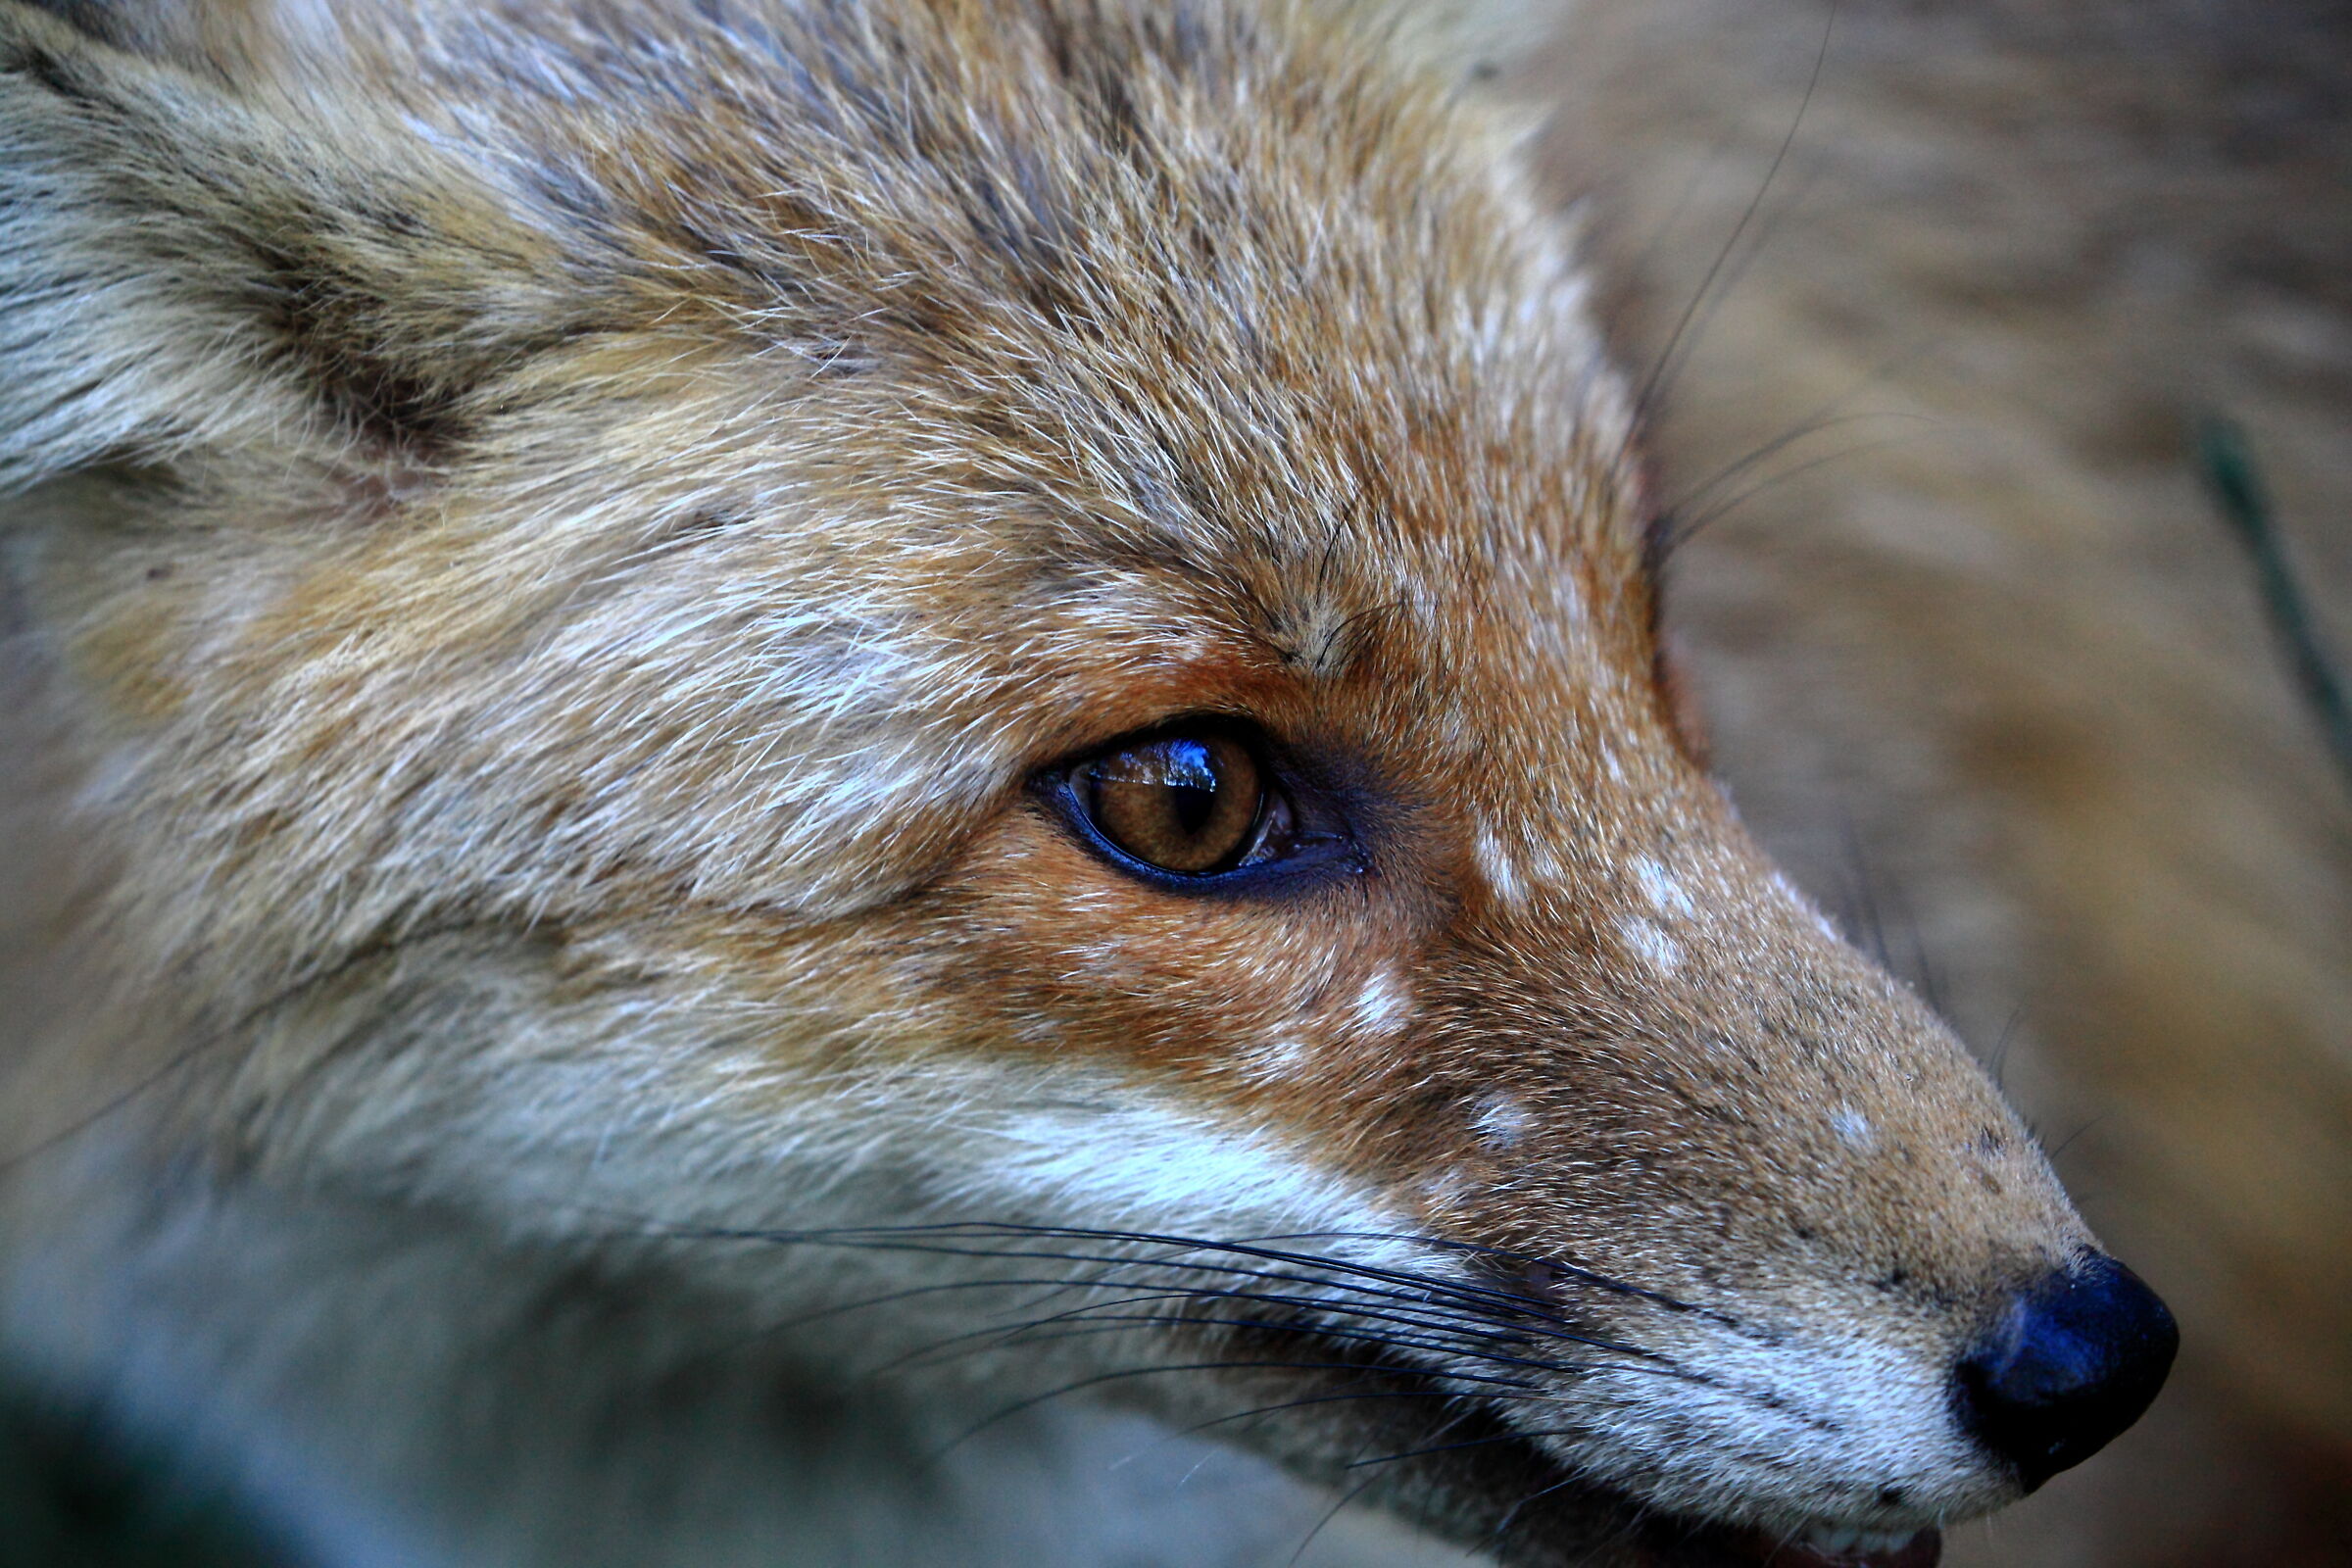 The Eyes of the Fox ...